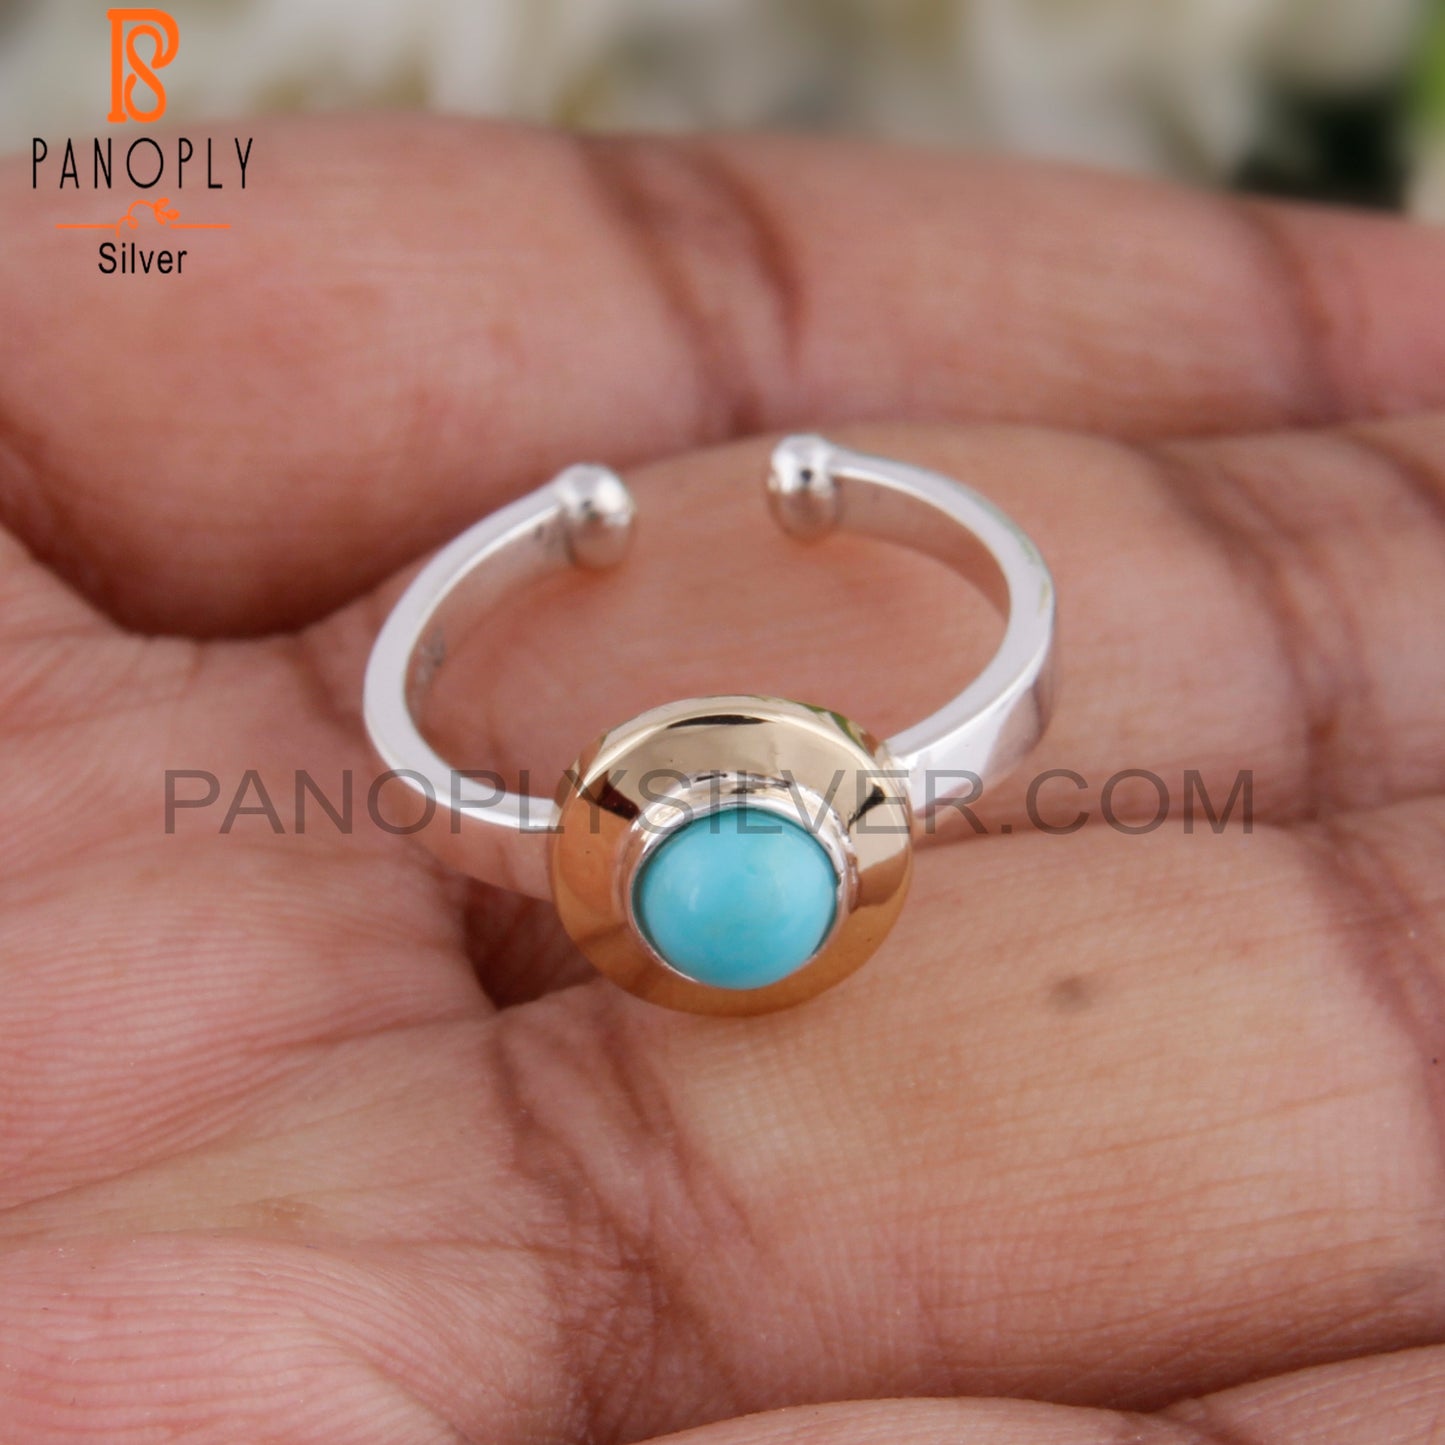 Round Arizona Turquoise 925 Sterling Silver Daily Wear Ring